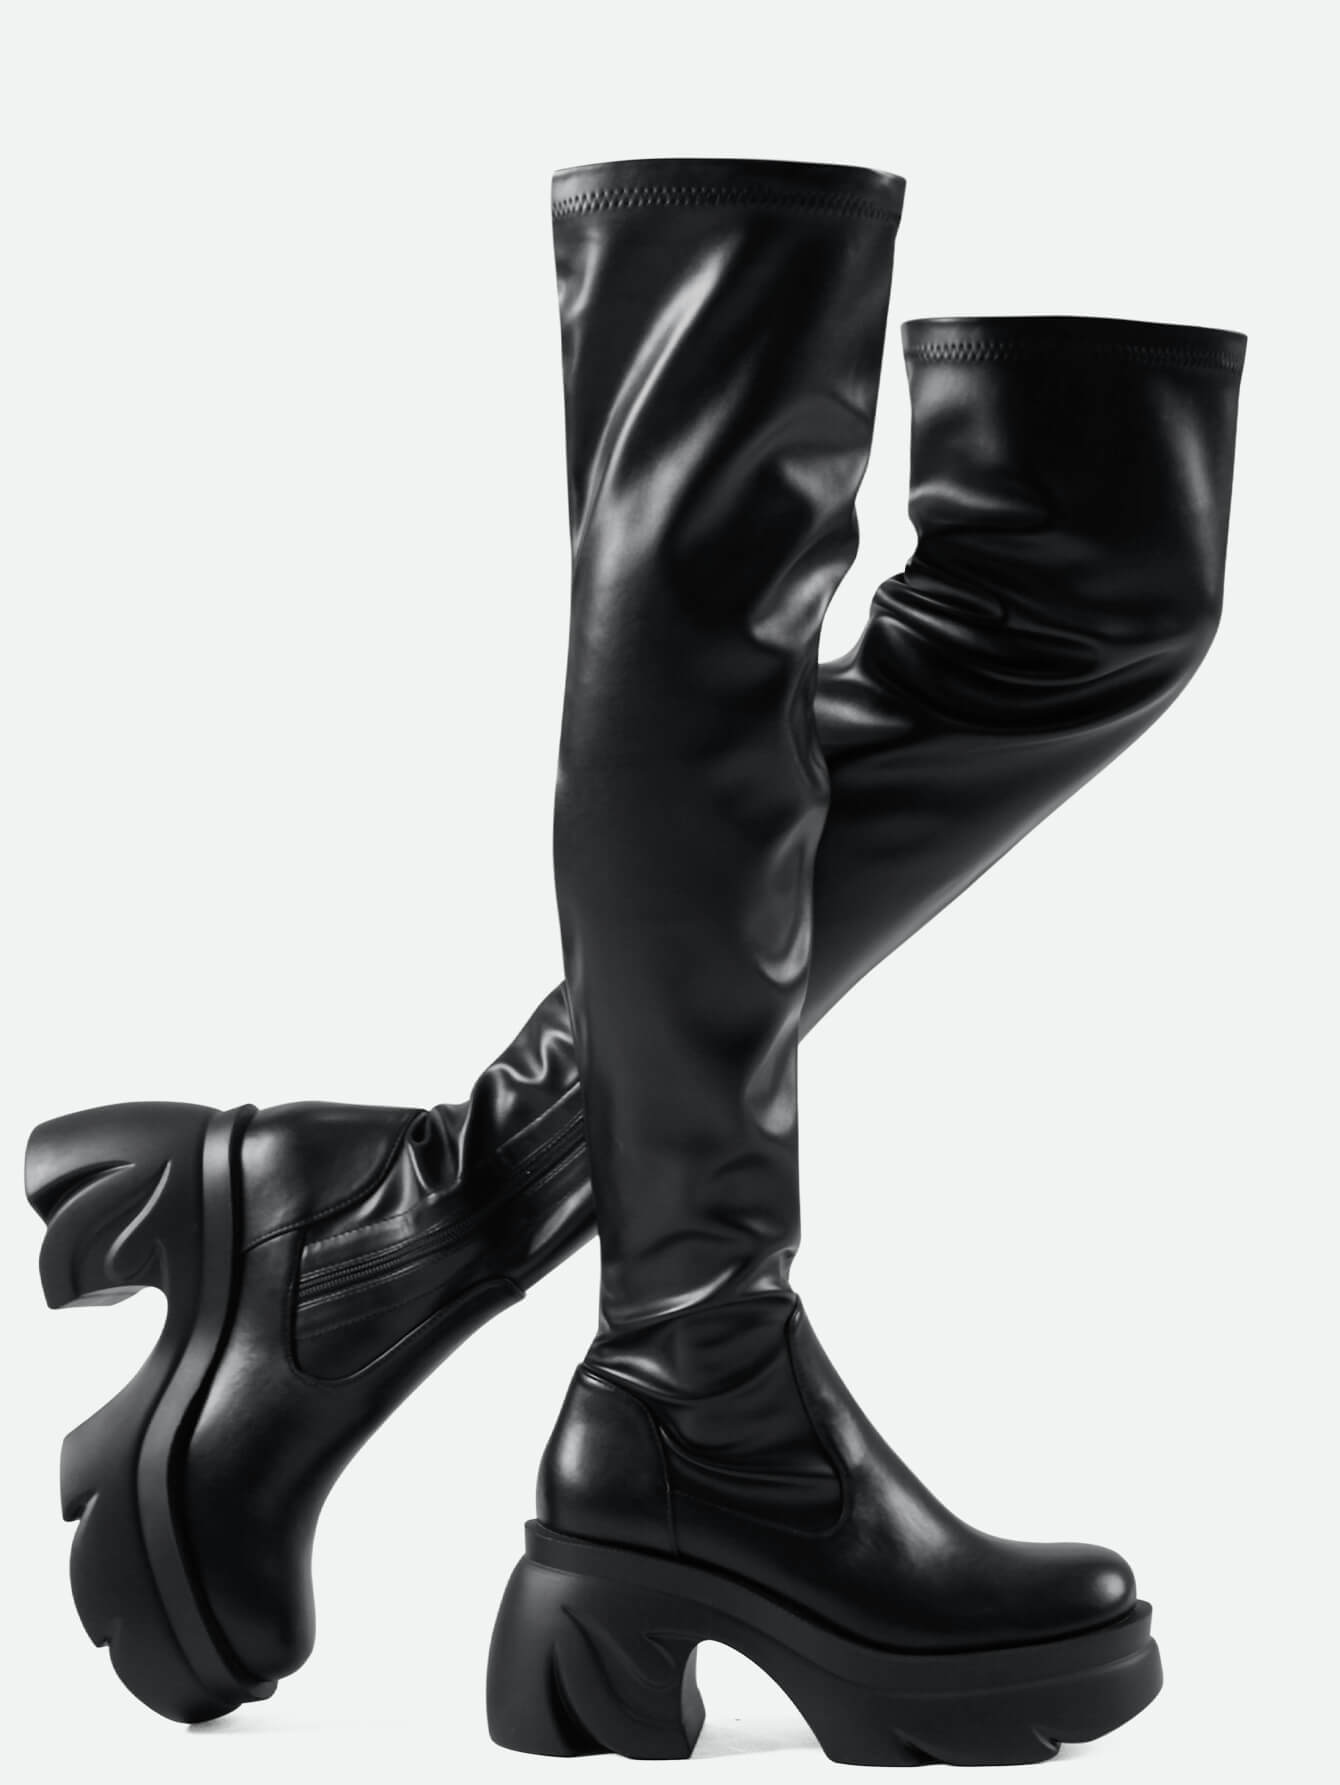 Shoe'N Tale Thigh High Boots Round Toe Mid Chunky High Heel